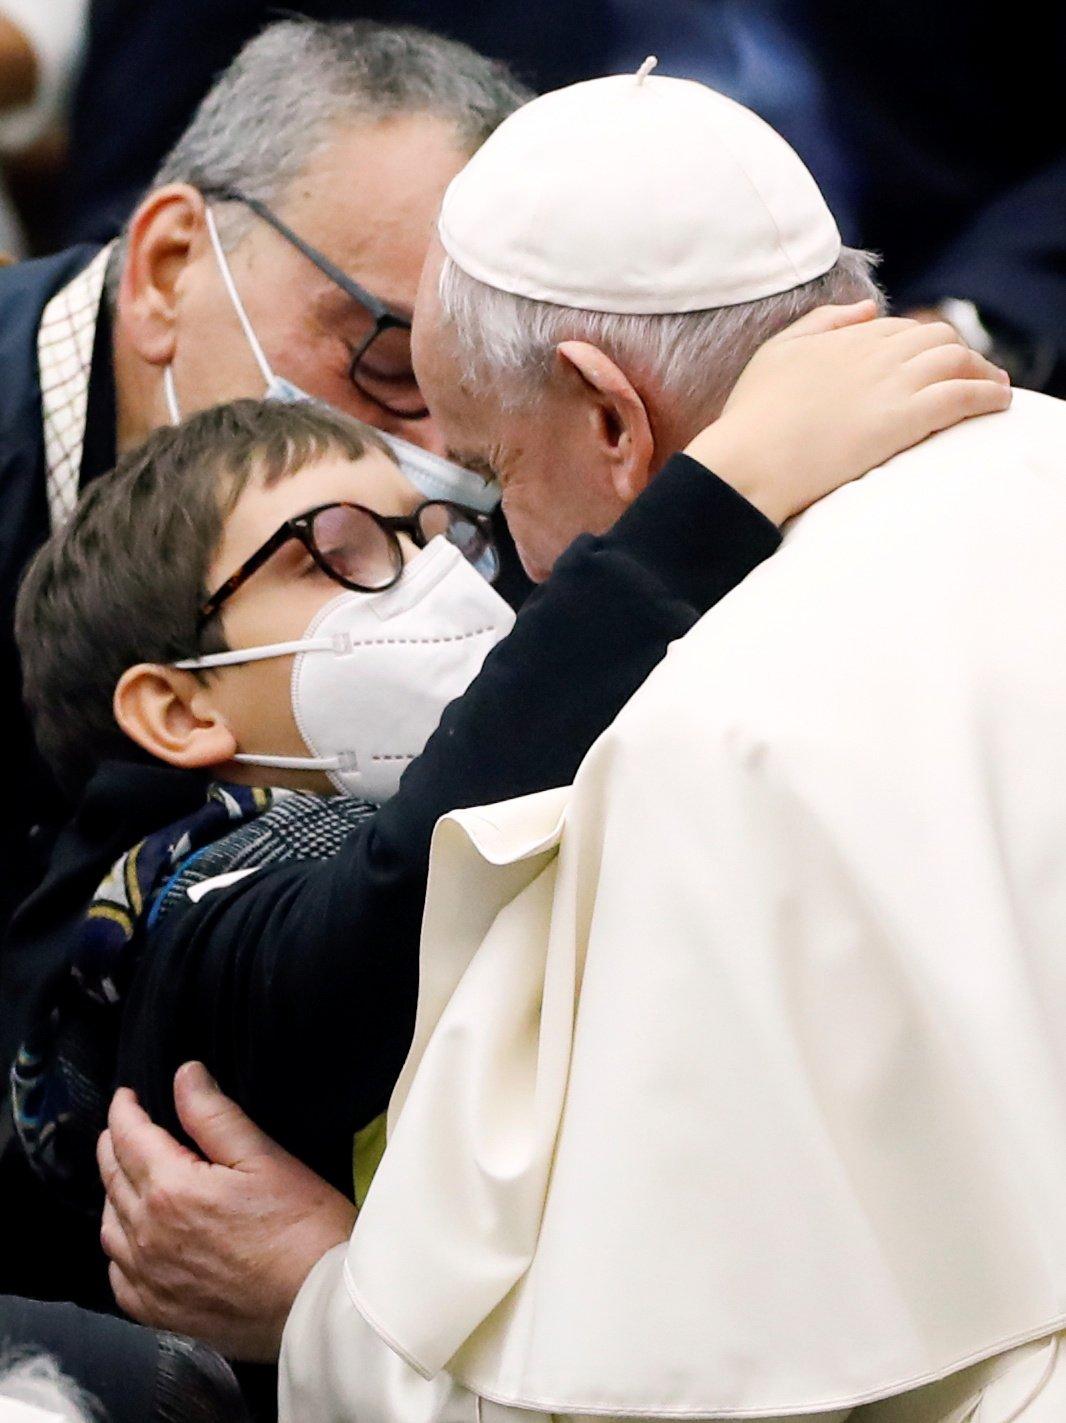 Freedom comes from serving others, pope says at audience